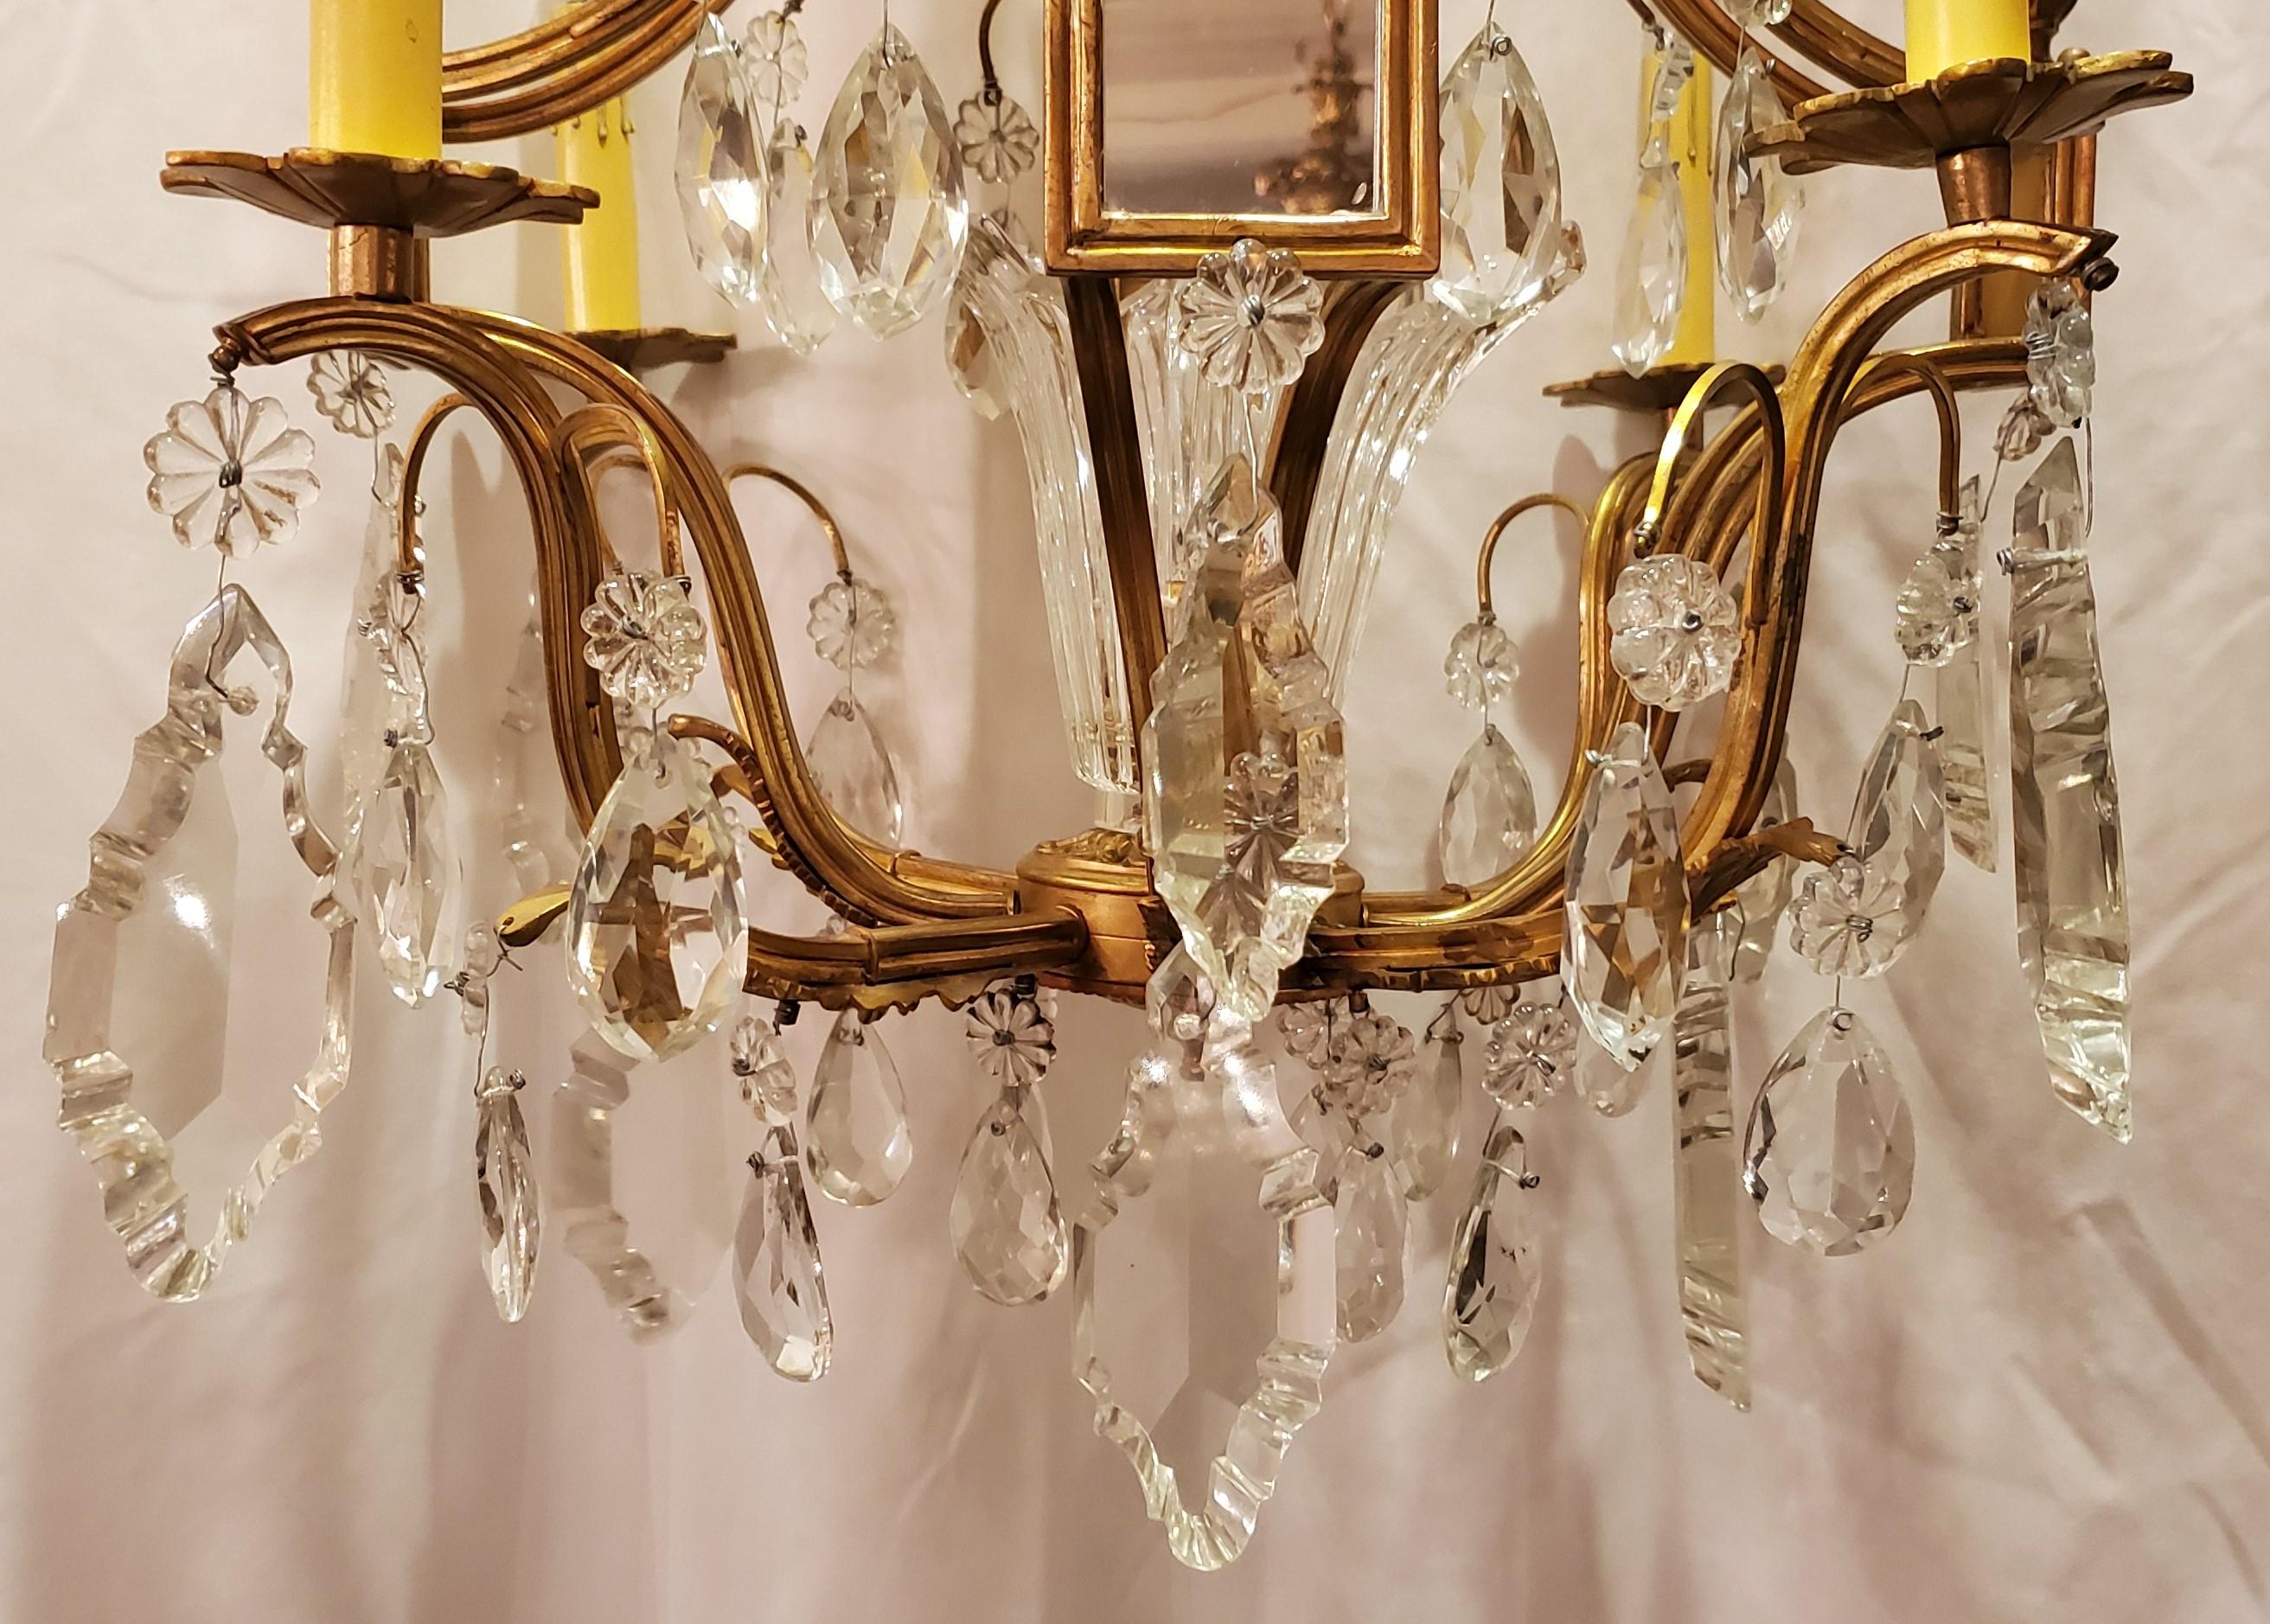 Antique French Ormolu and Baccarat Crystal Chandelier with Mirror Insets In Good Condition For Sale In New Orleans, LA